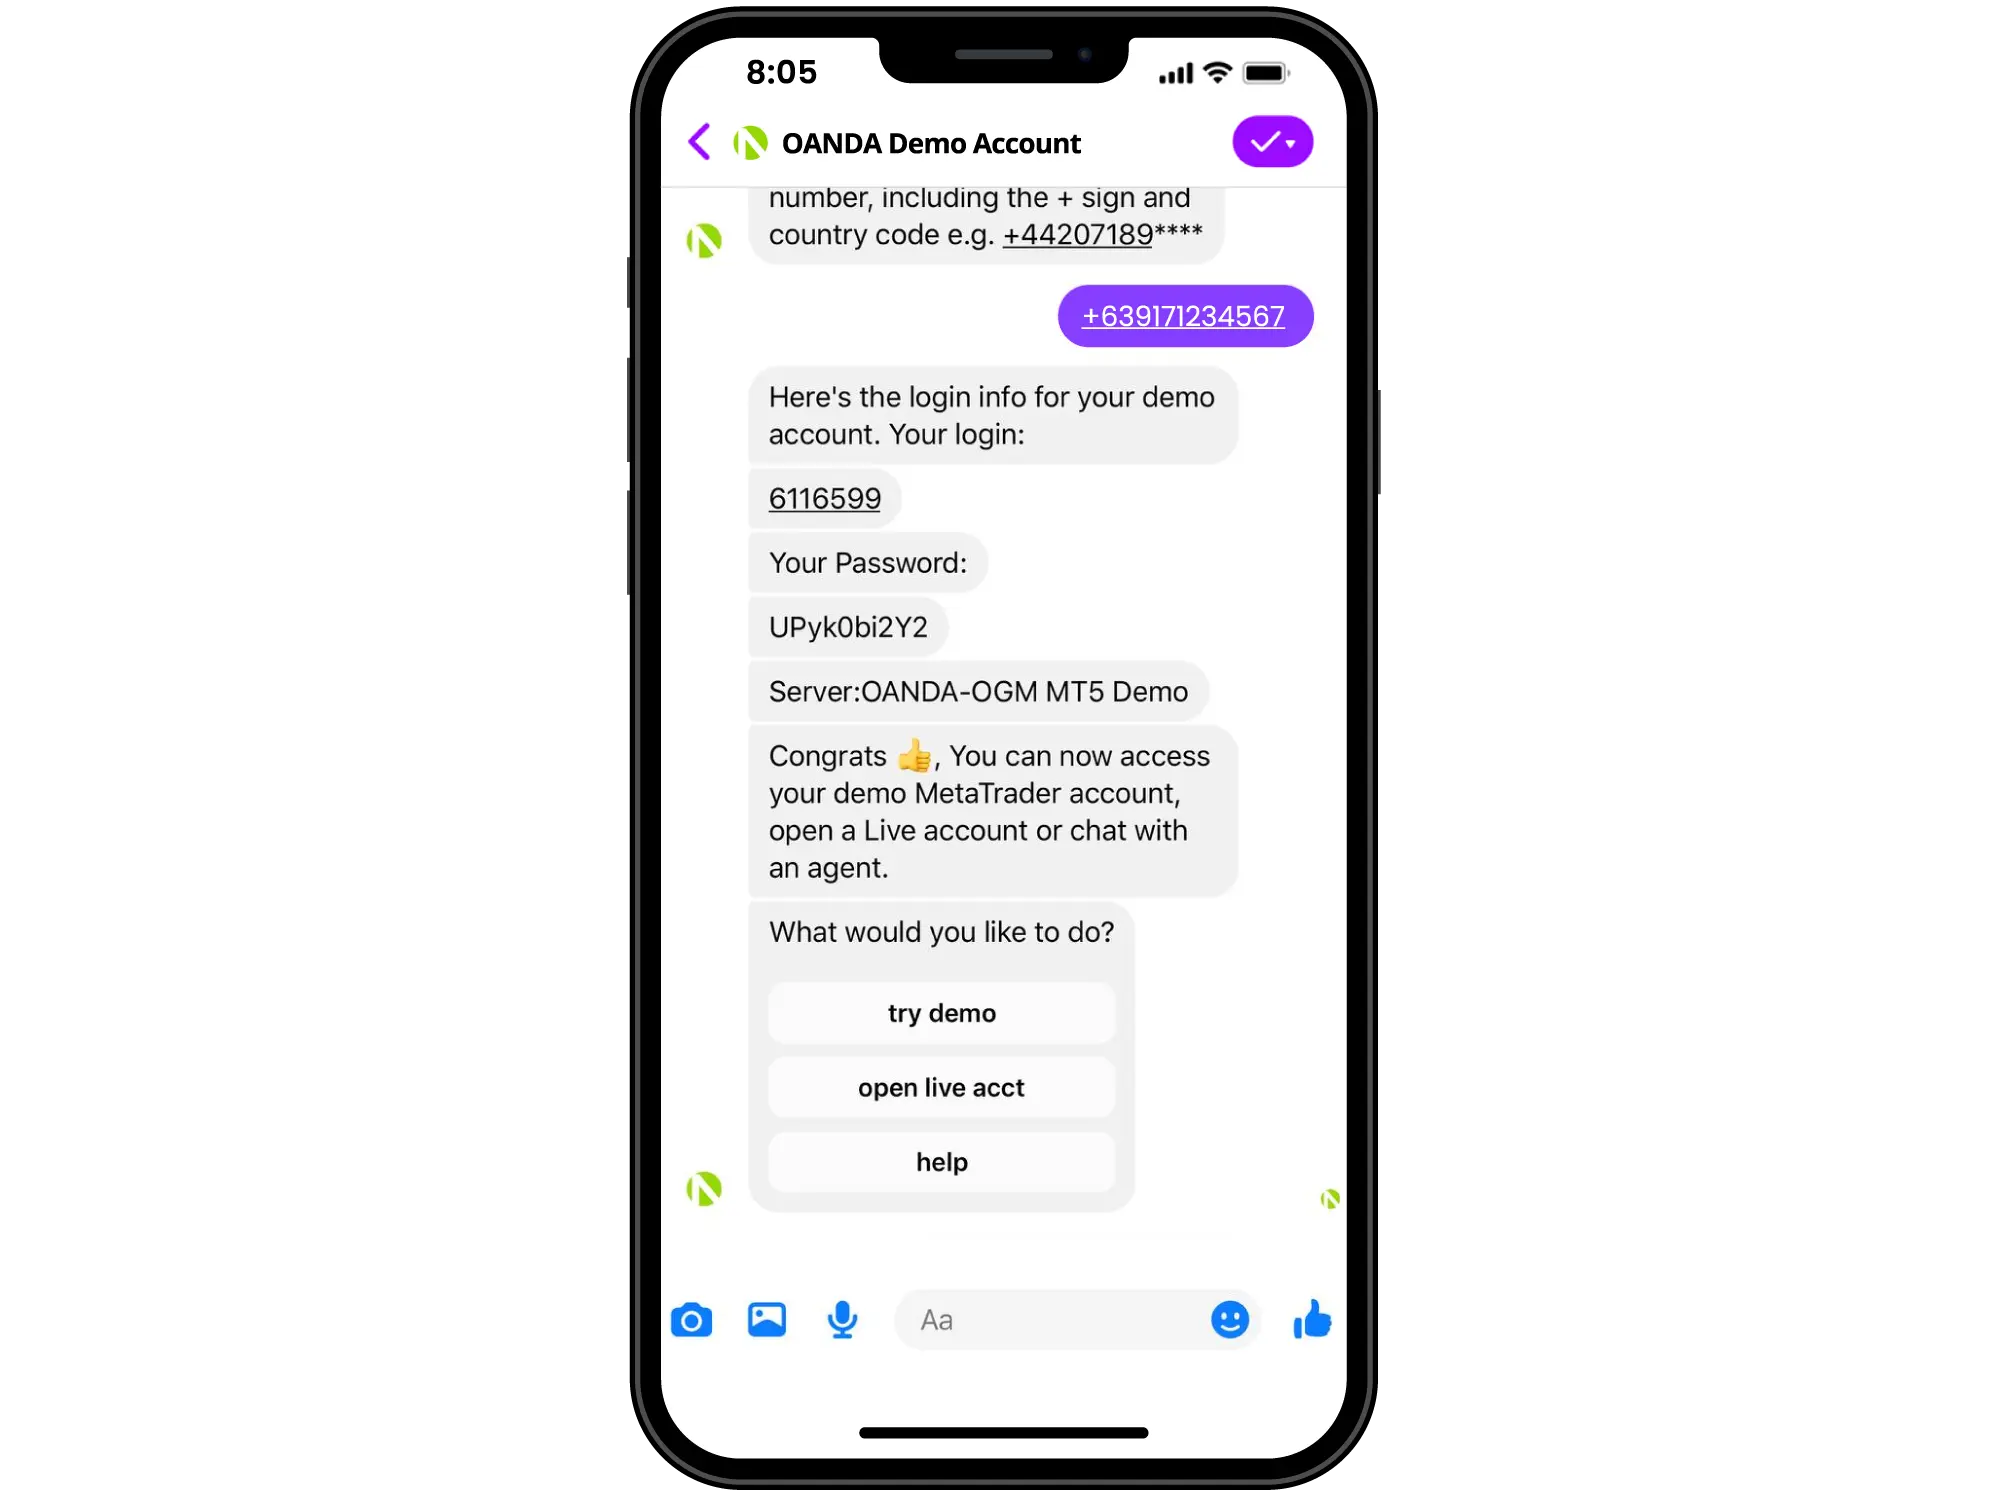 A Facebook Messenger conversation featuring OANDA's MT5 demo sign-up automation via chatbot